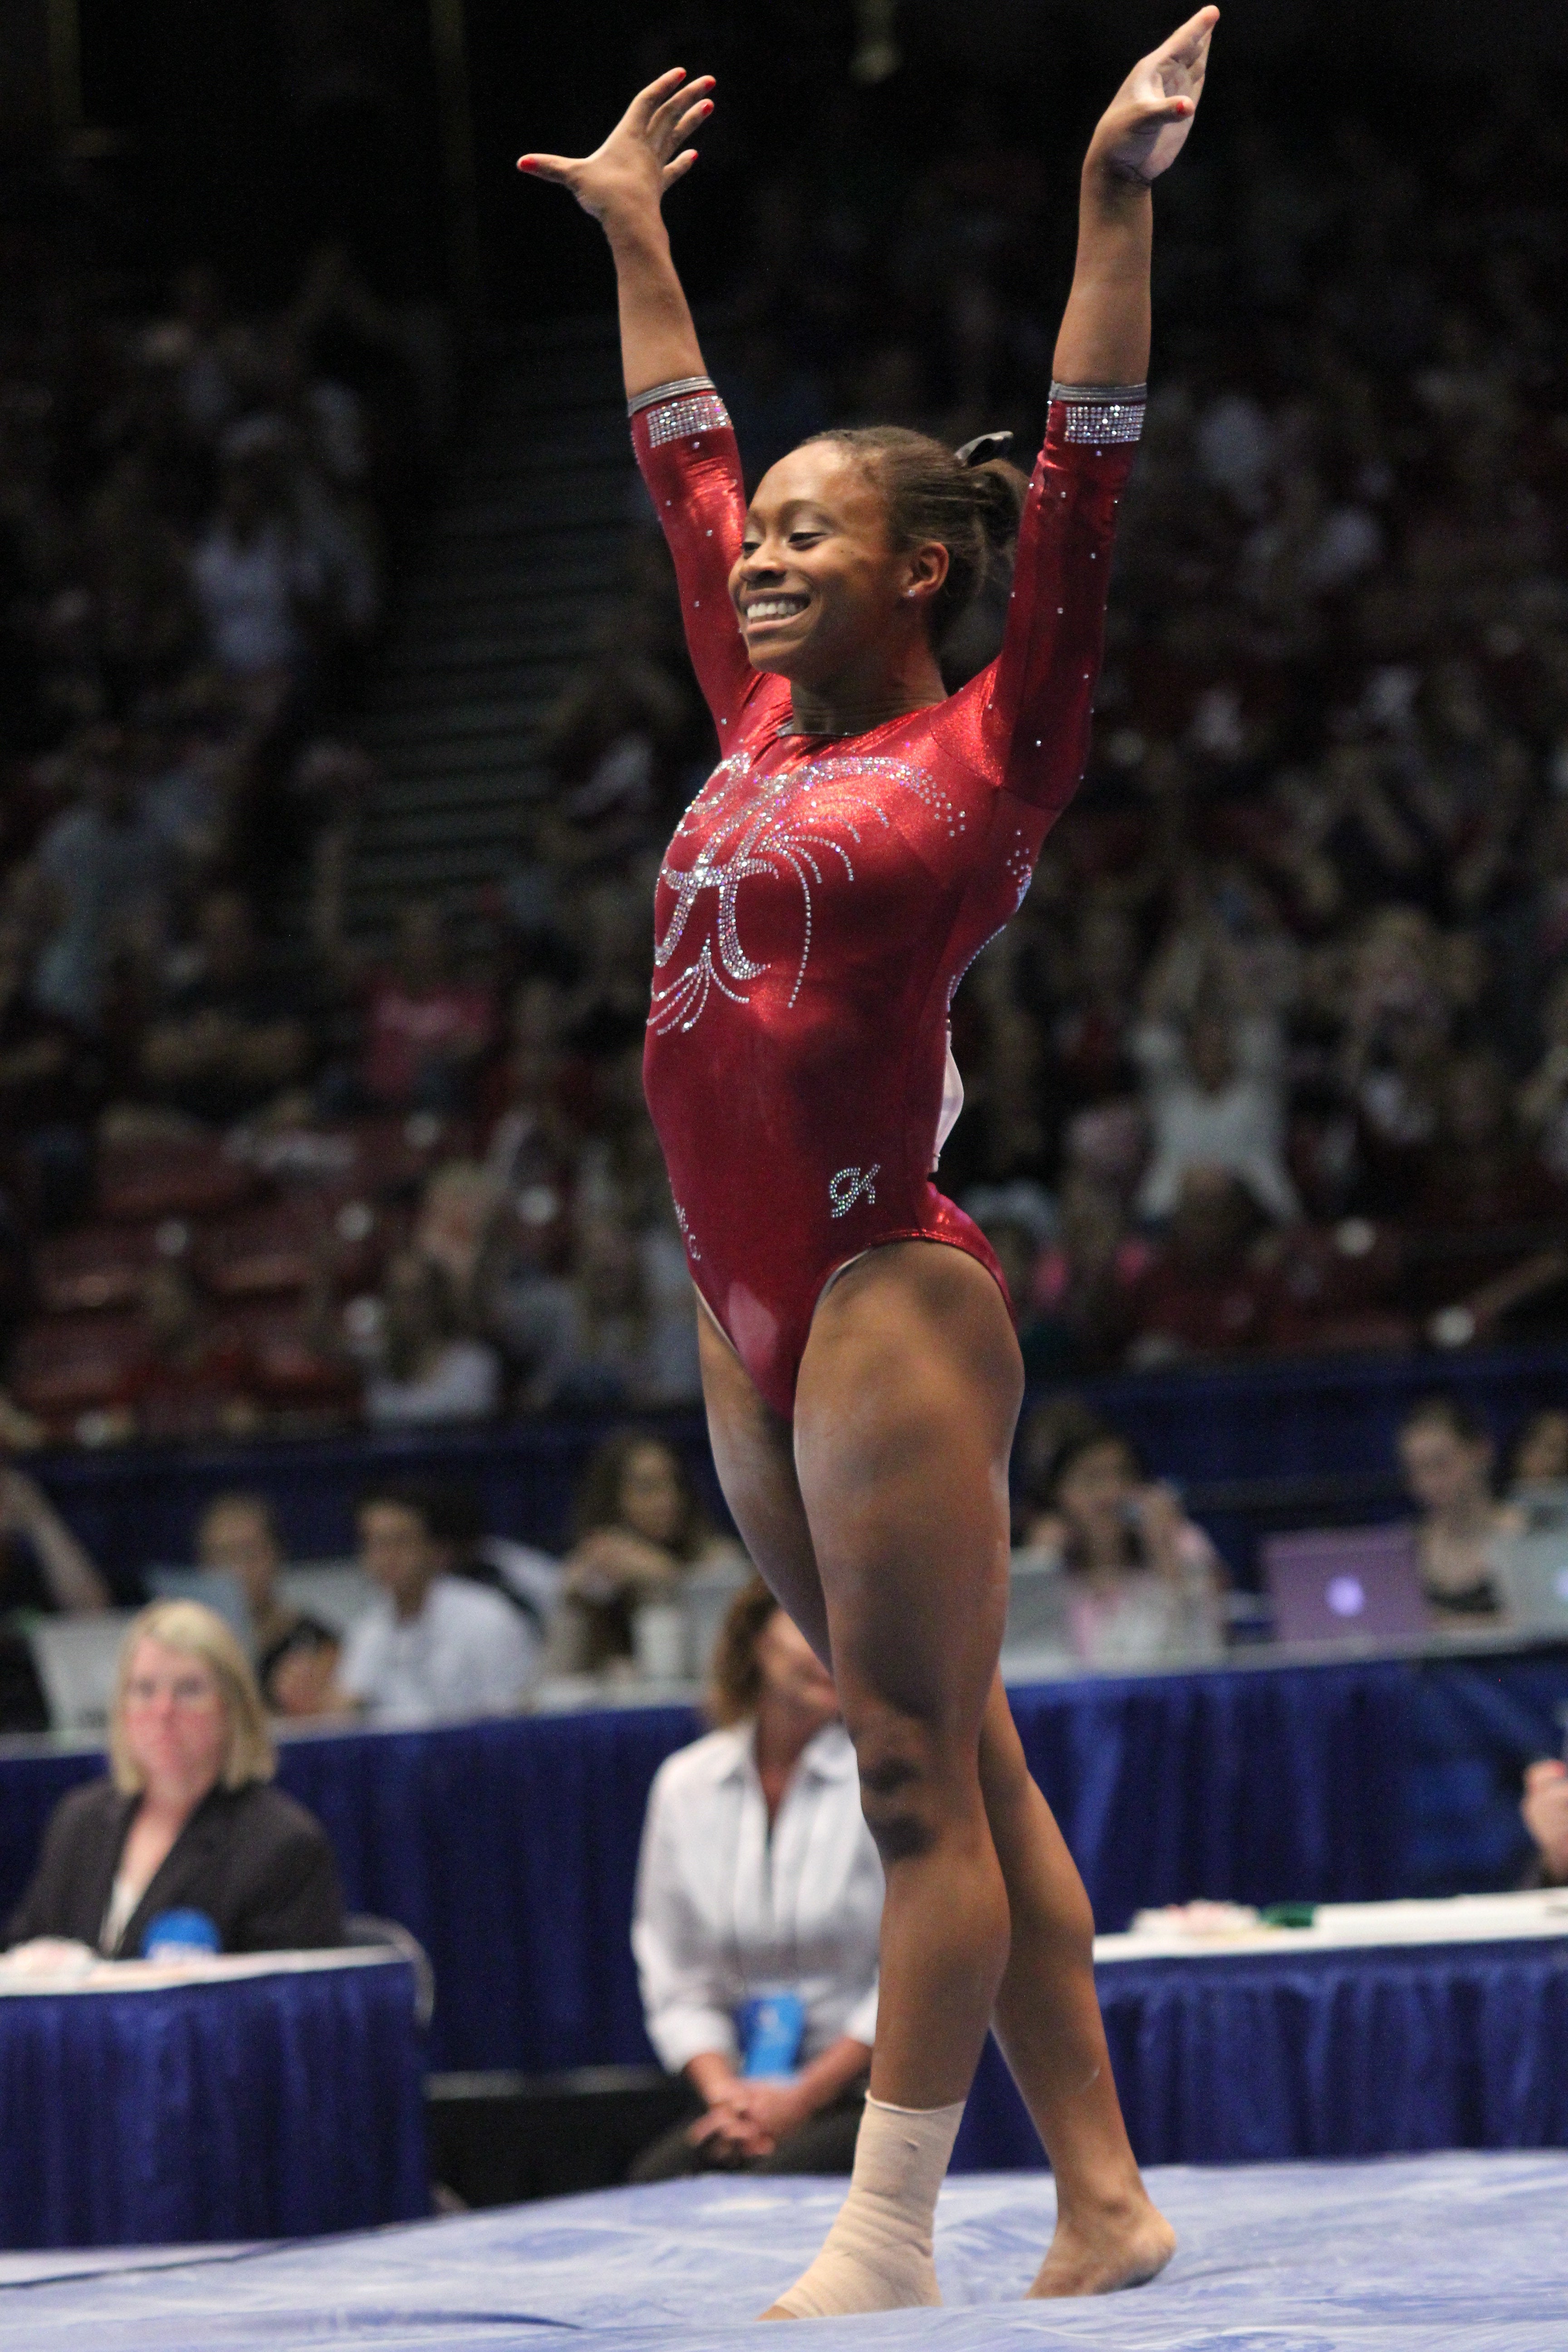 Watch This Gymnast Milly Rock Her Routine To A Near Perfect Score